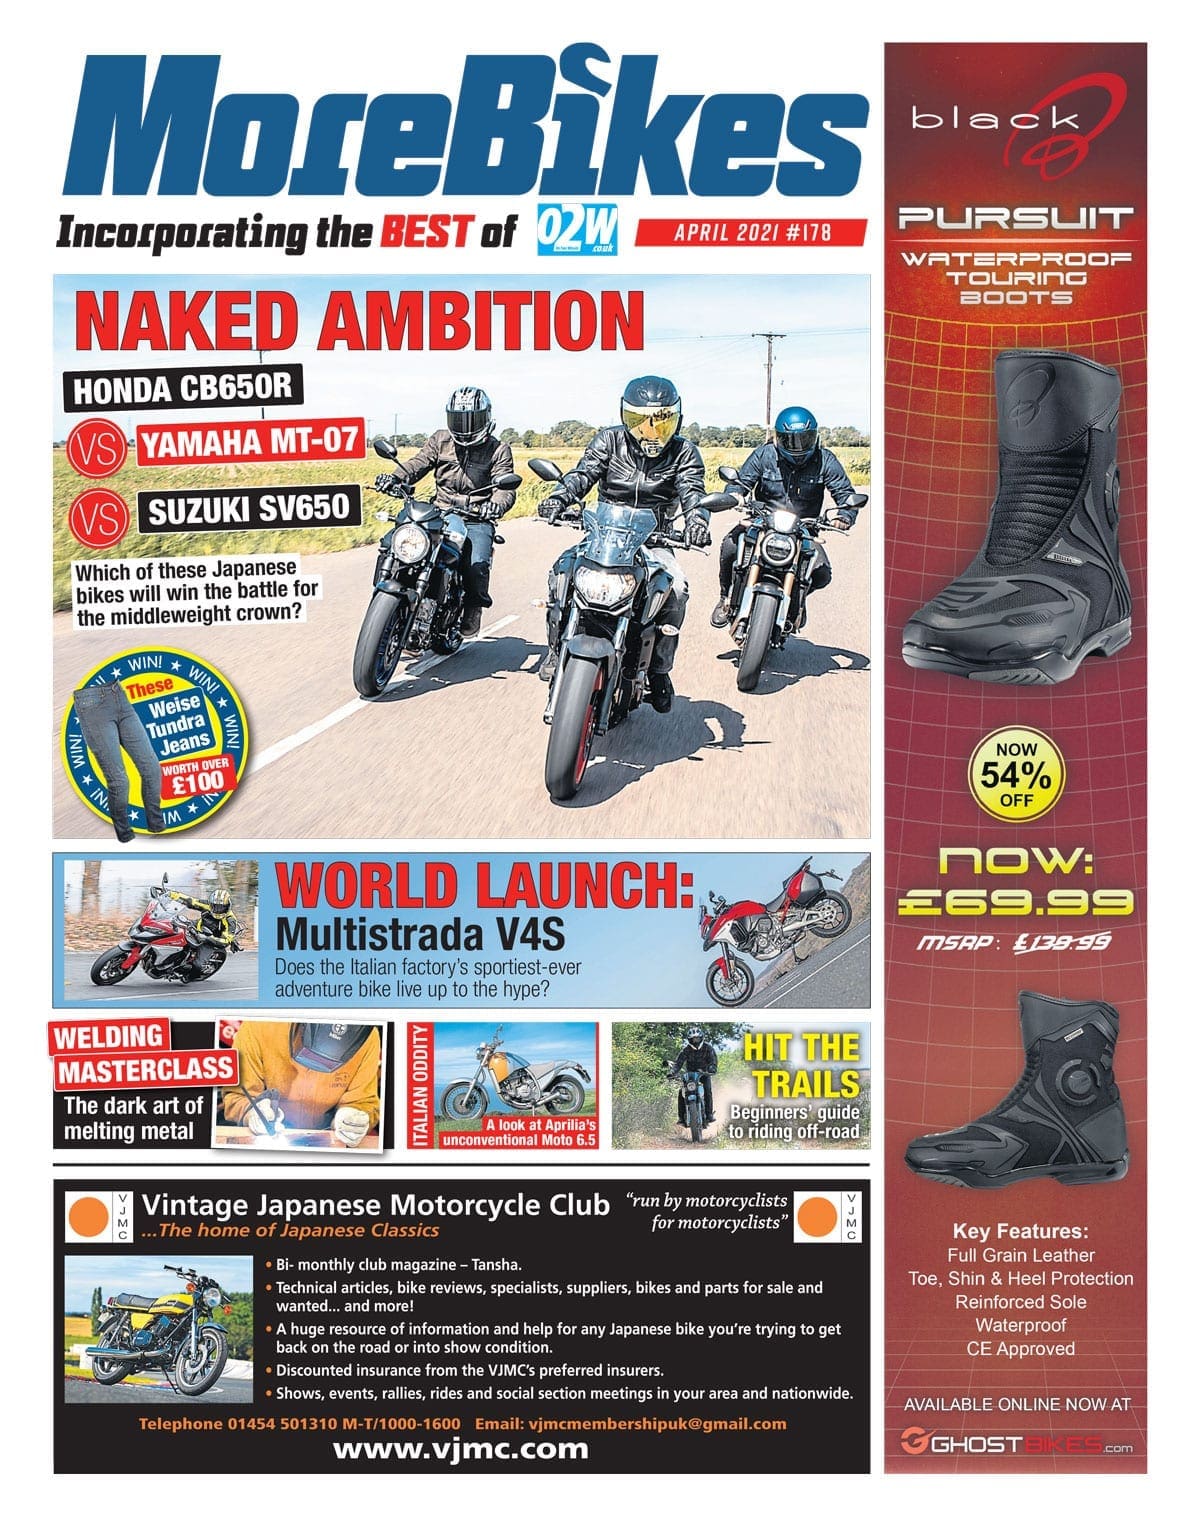 PREVIEW: April issue of MoreBikes